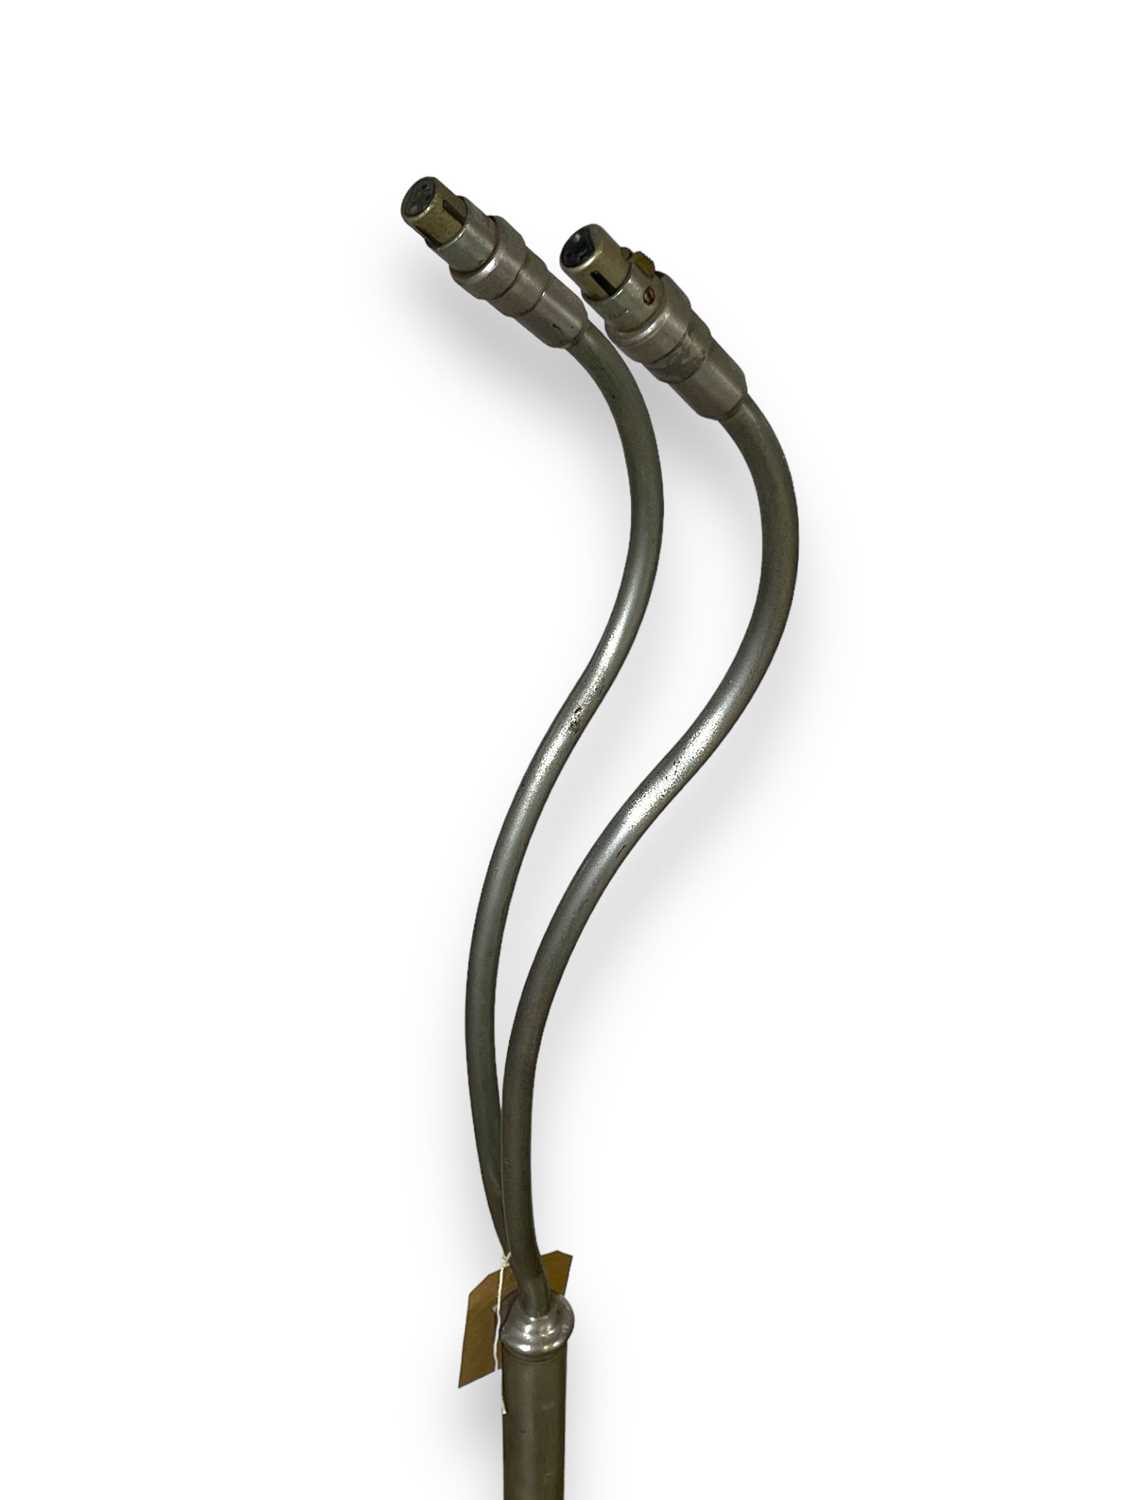 BBC HERITAGE COLLECTION - ORIGINAL BBC MICROPHONE STAND. - Image 2 of 3